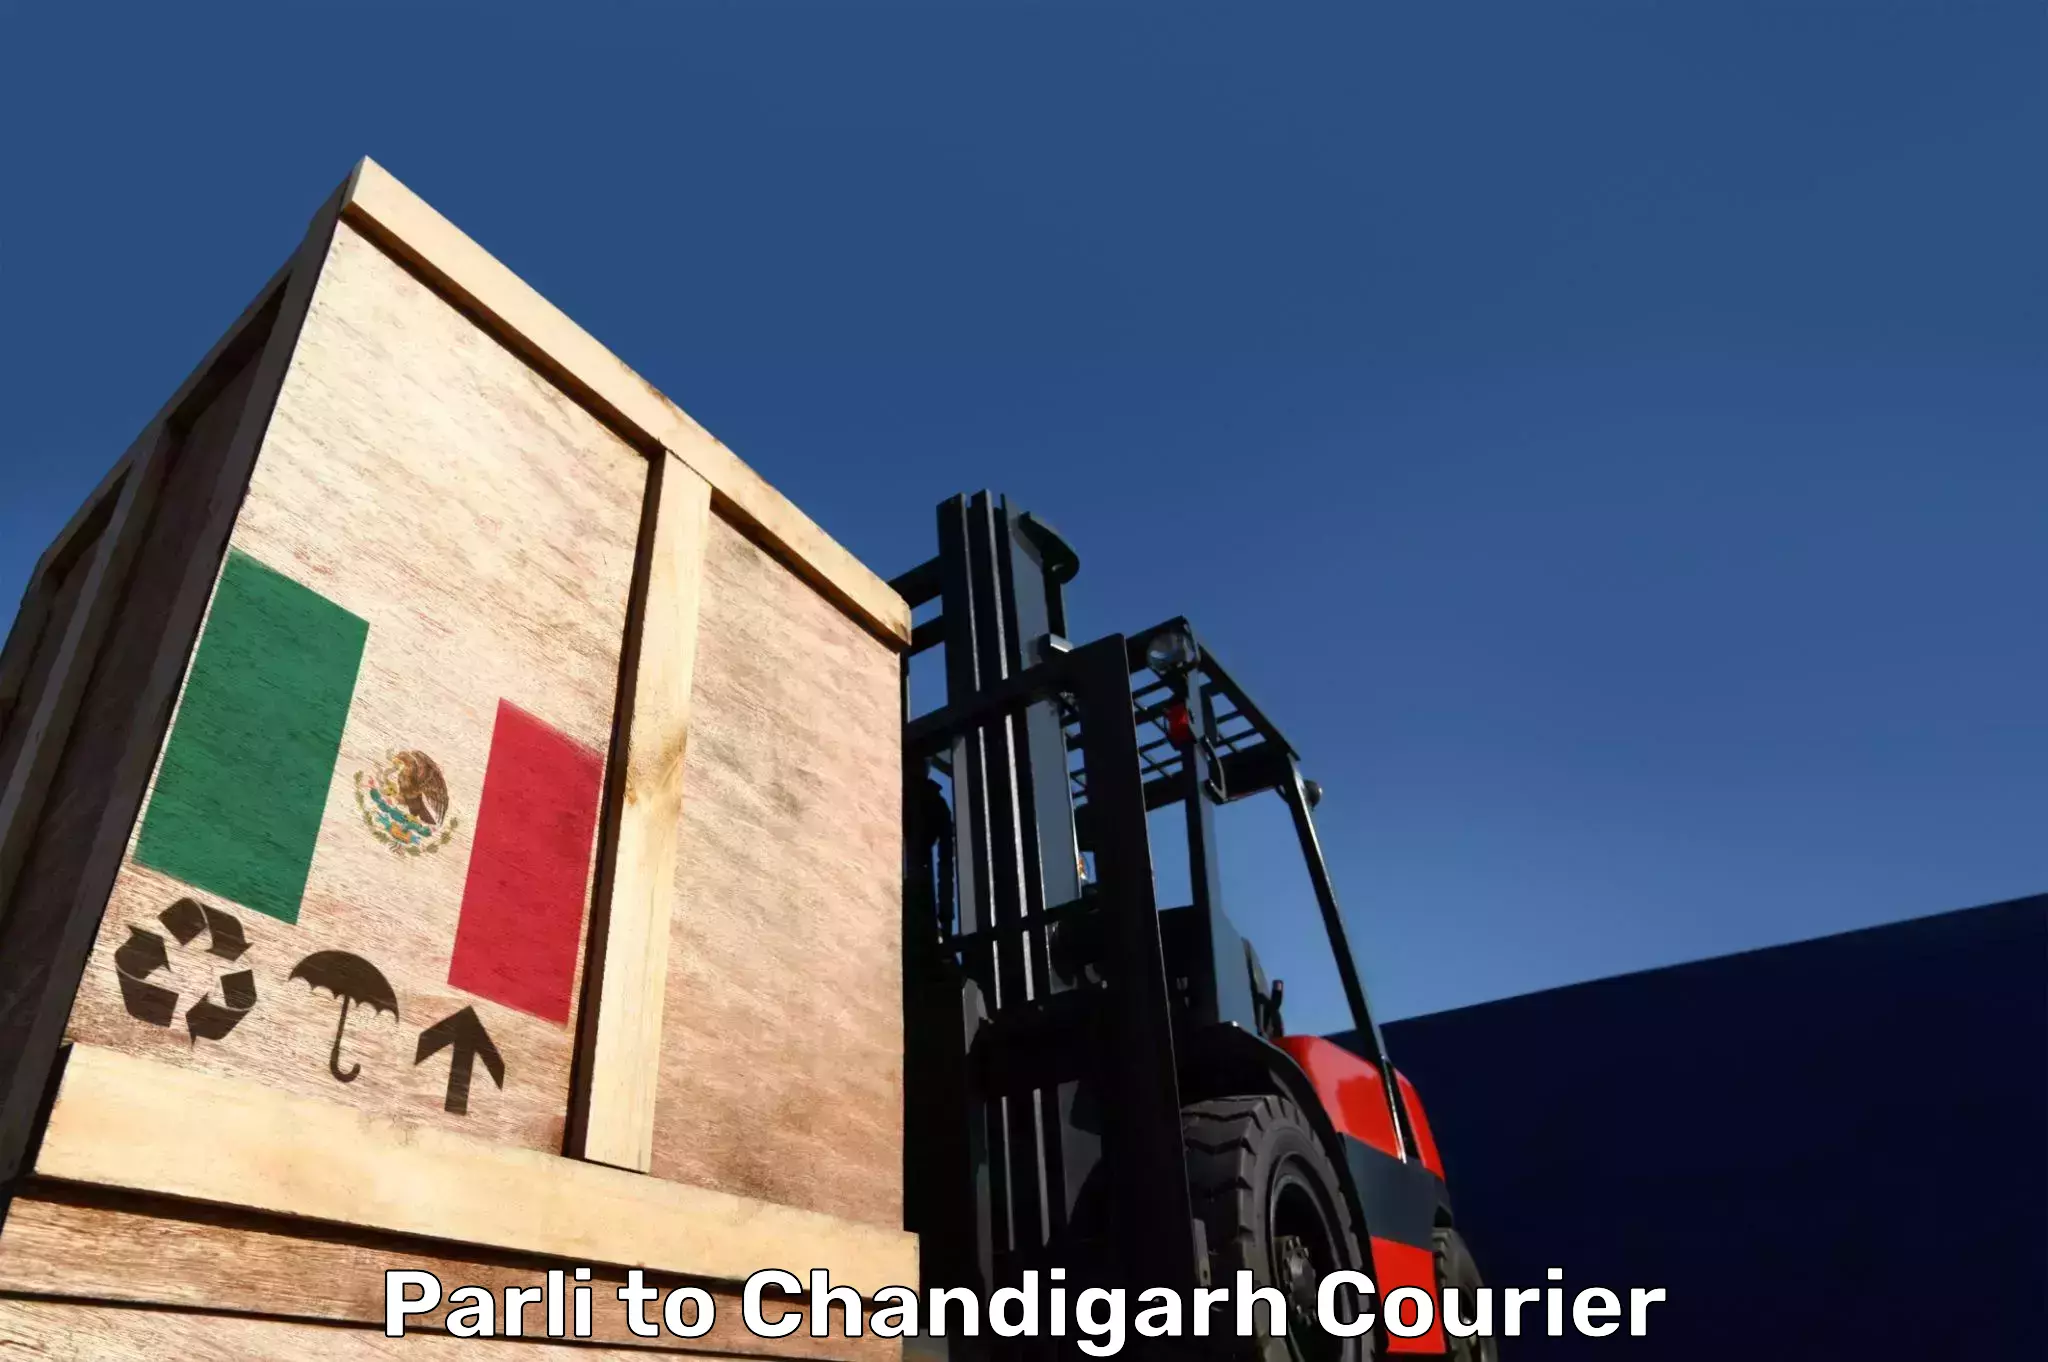 Baggage shipping experts Parli to Chandigarh